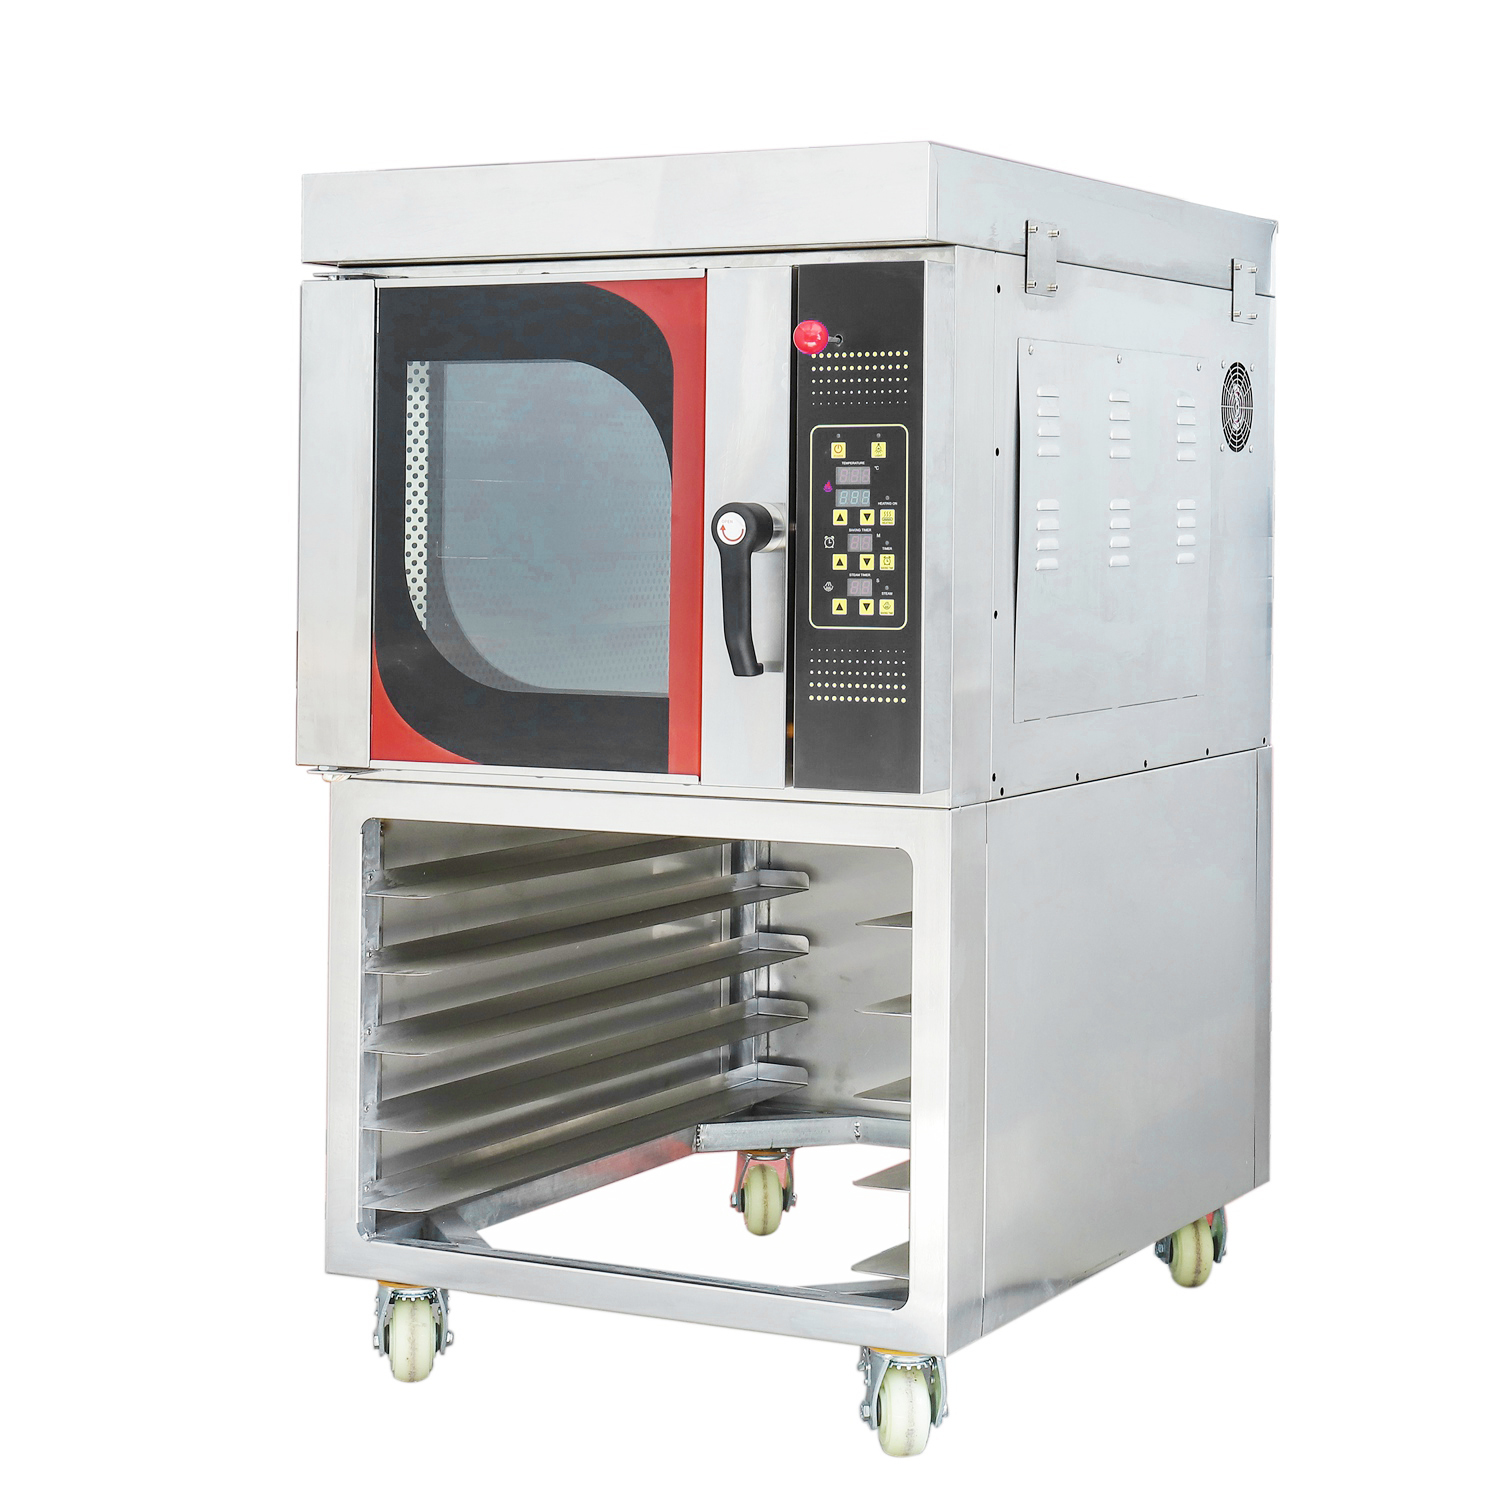 5 Trays Electric Convection Oven